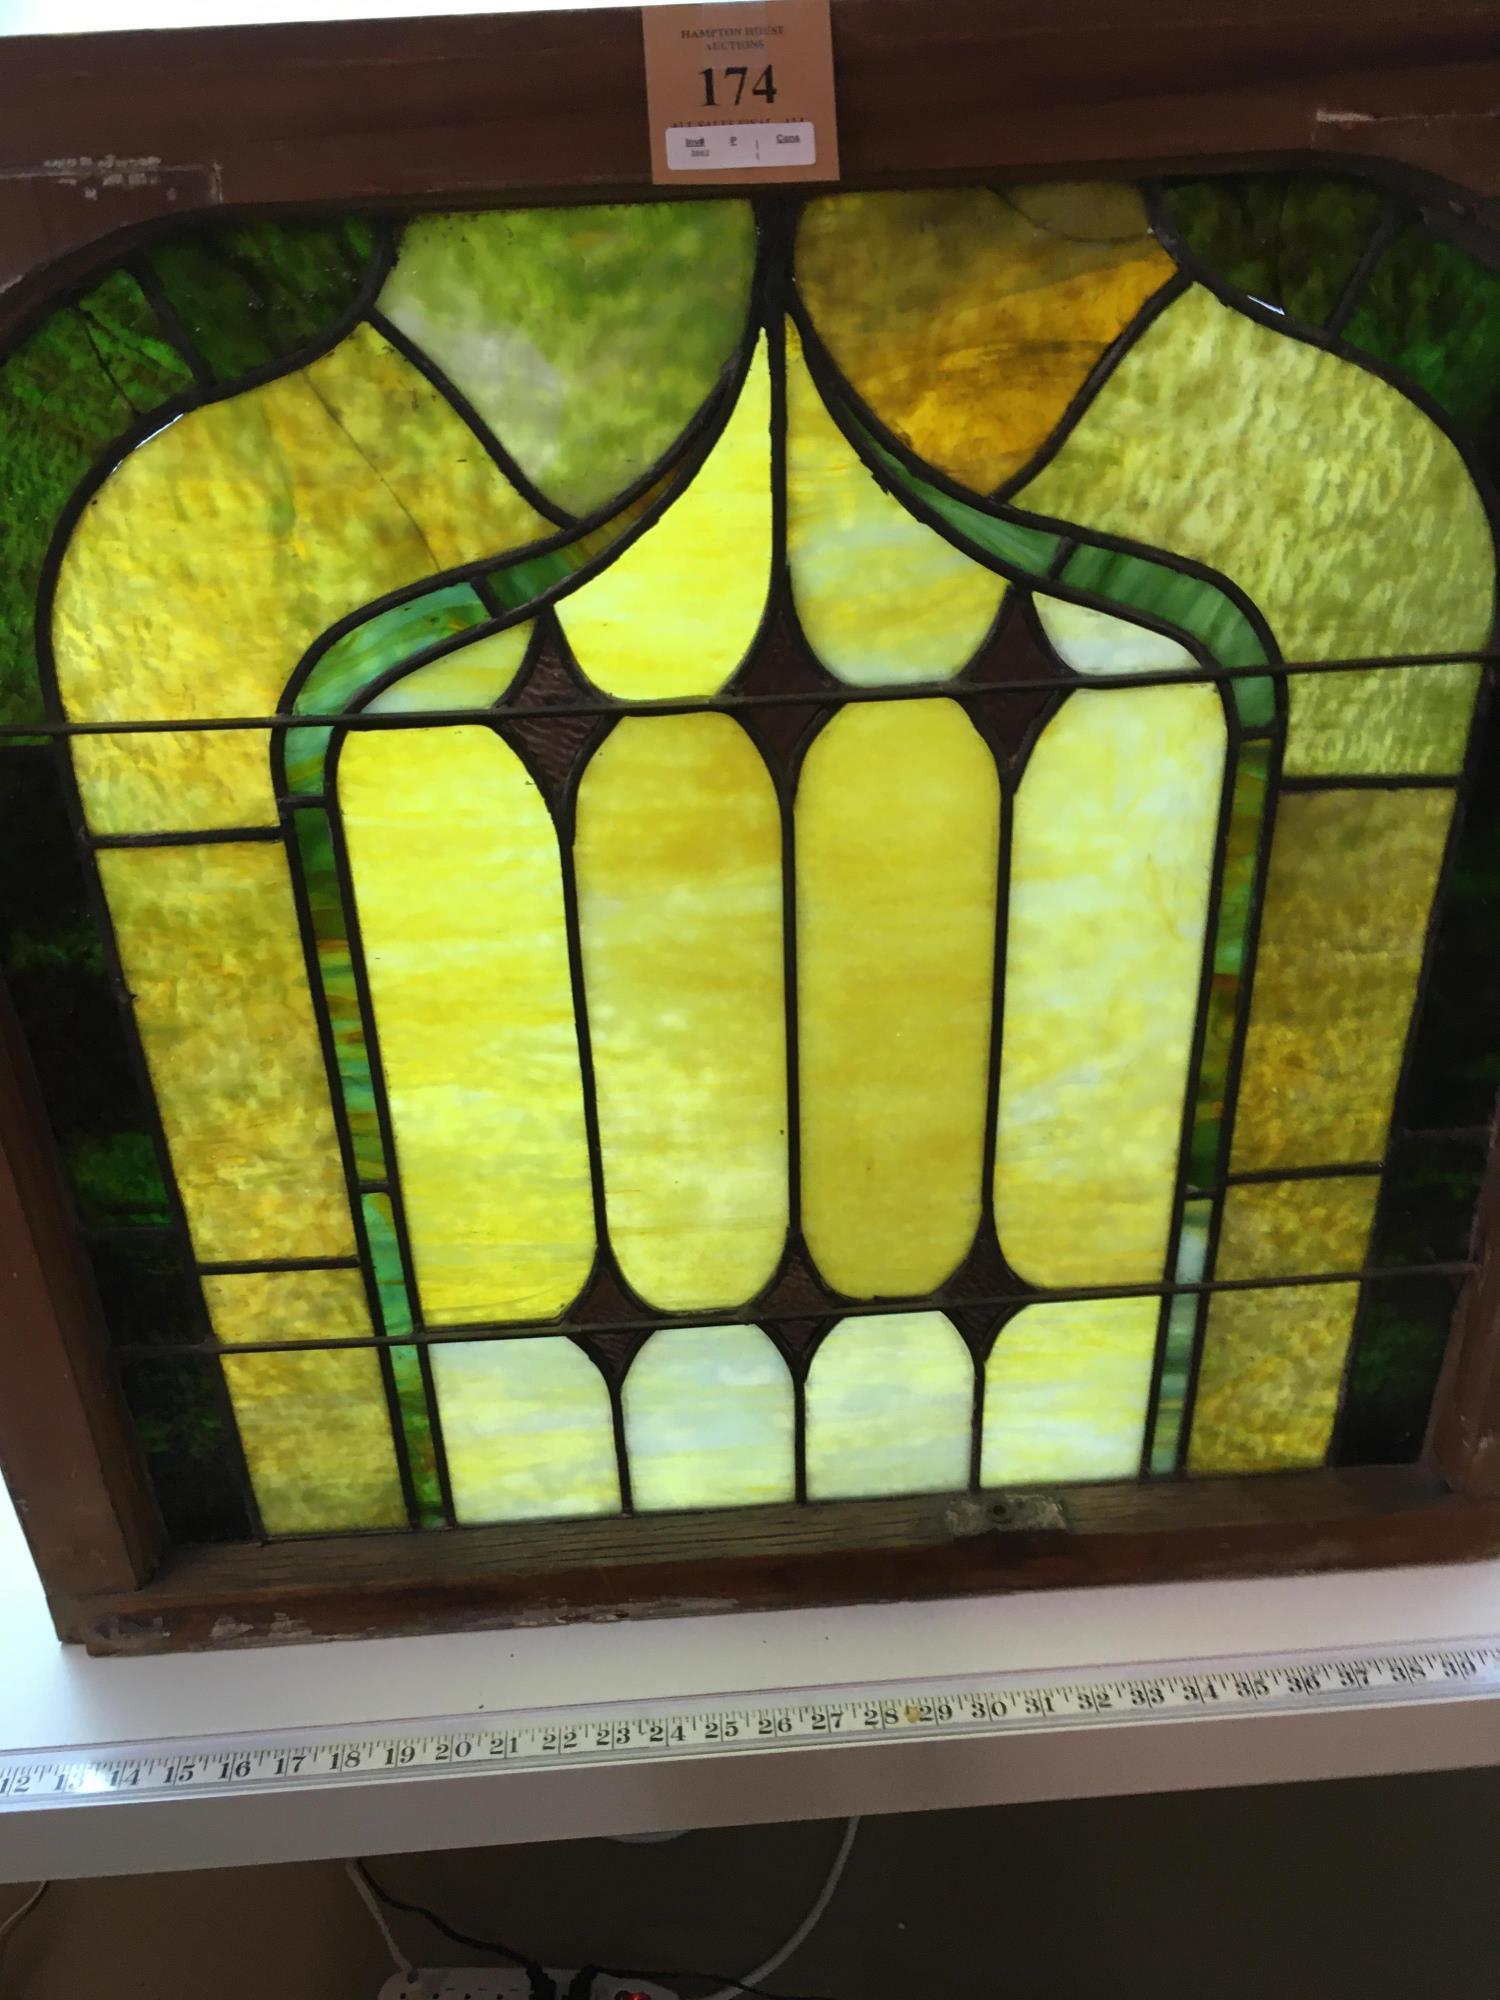 ANTIQUE STAINED GLASS WINDOW PANE